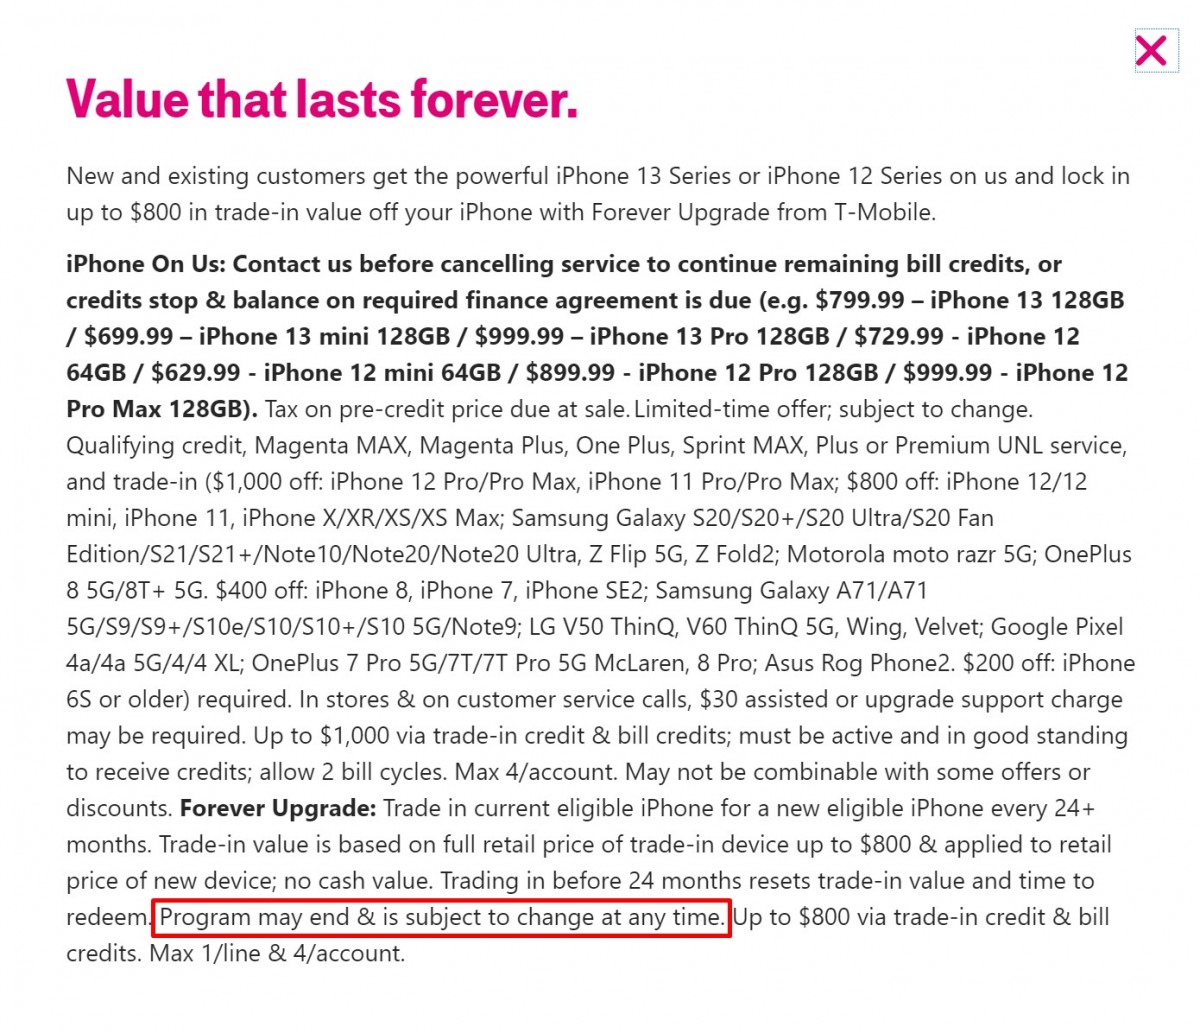 T-Mobile's new 'Forever Upgrade' program for the iPhone 13 isn't really forever